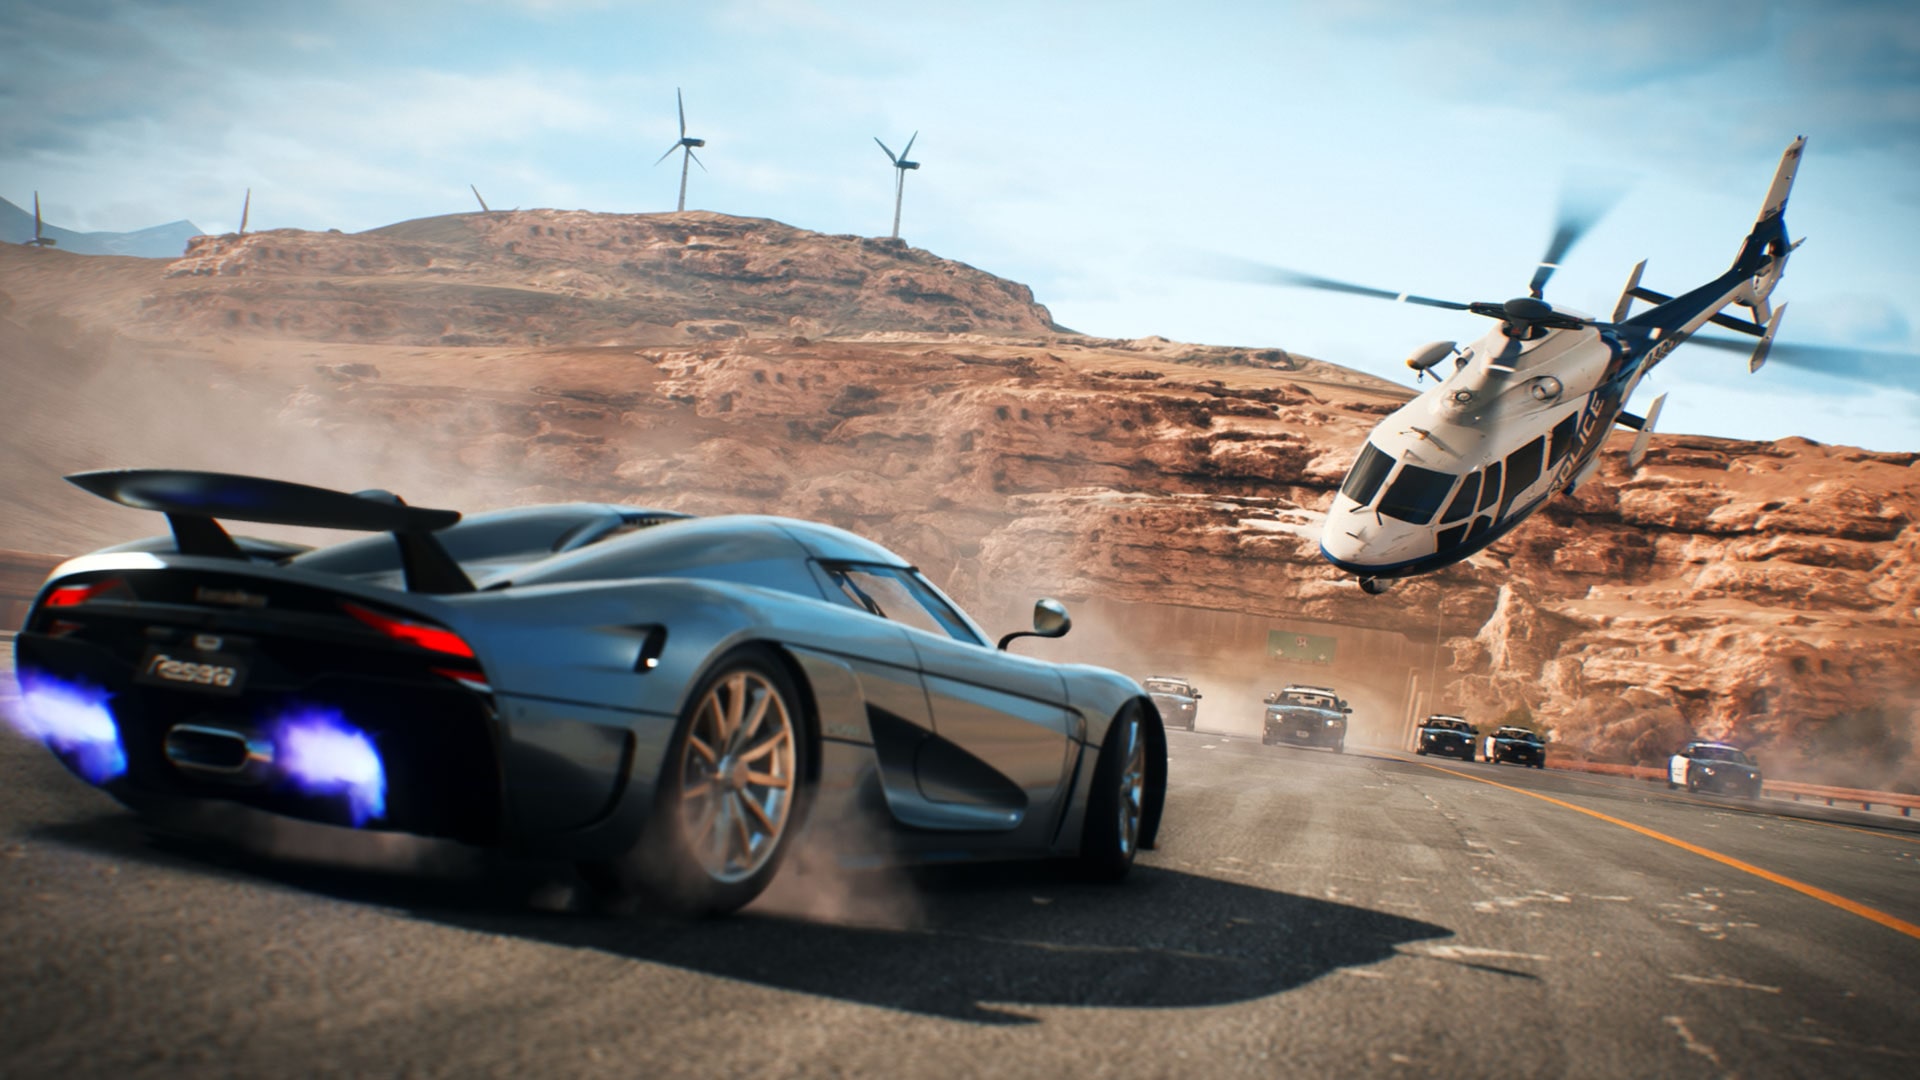 need for speed ps4 online